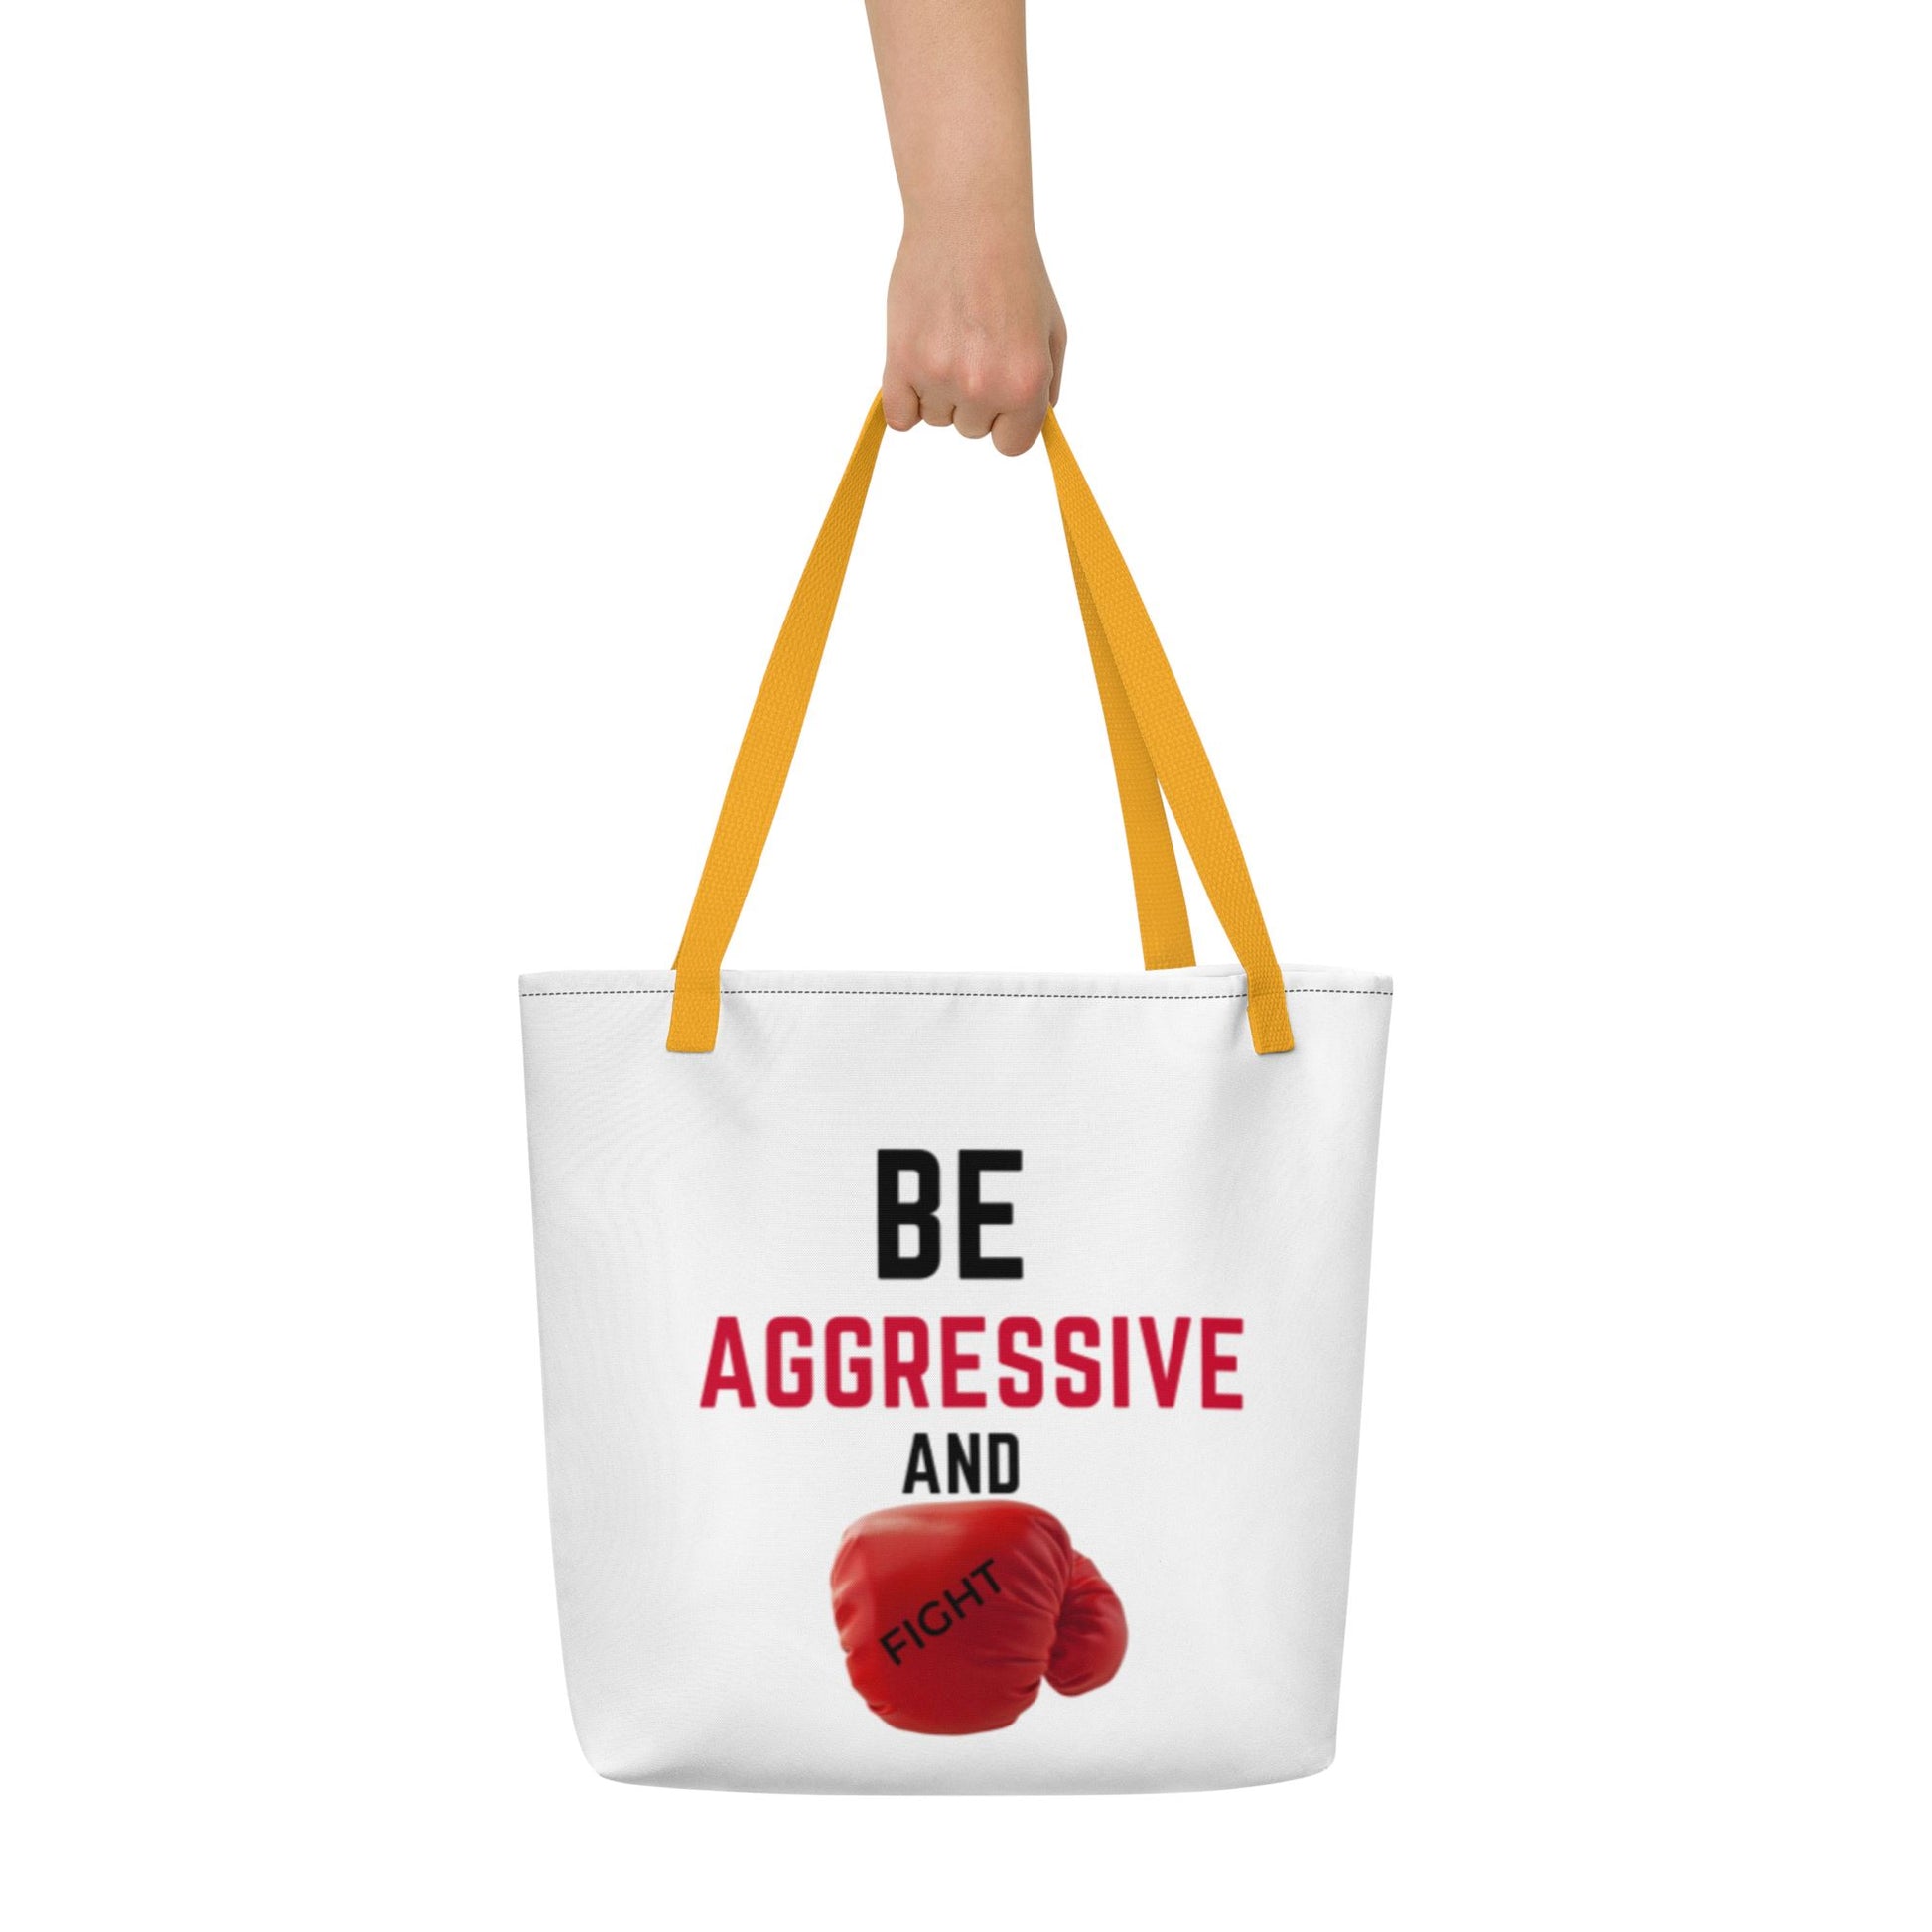 A trendy beach bag, where you can put everything that matters when hitting those warm beaches. Whether you are carrying your favorite things. do so showing off your statements.